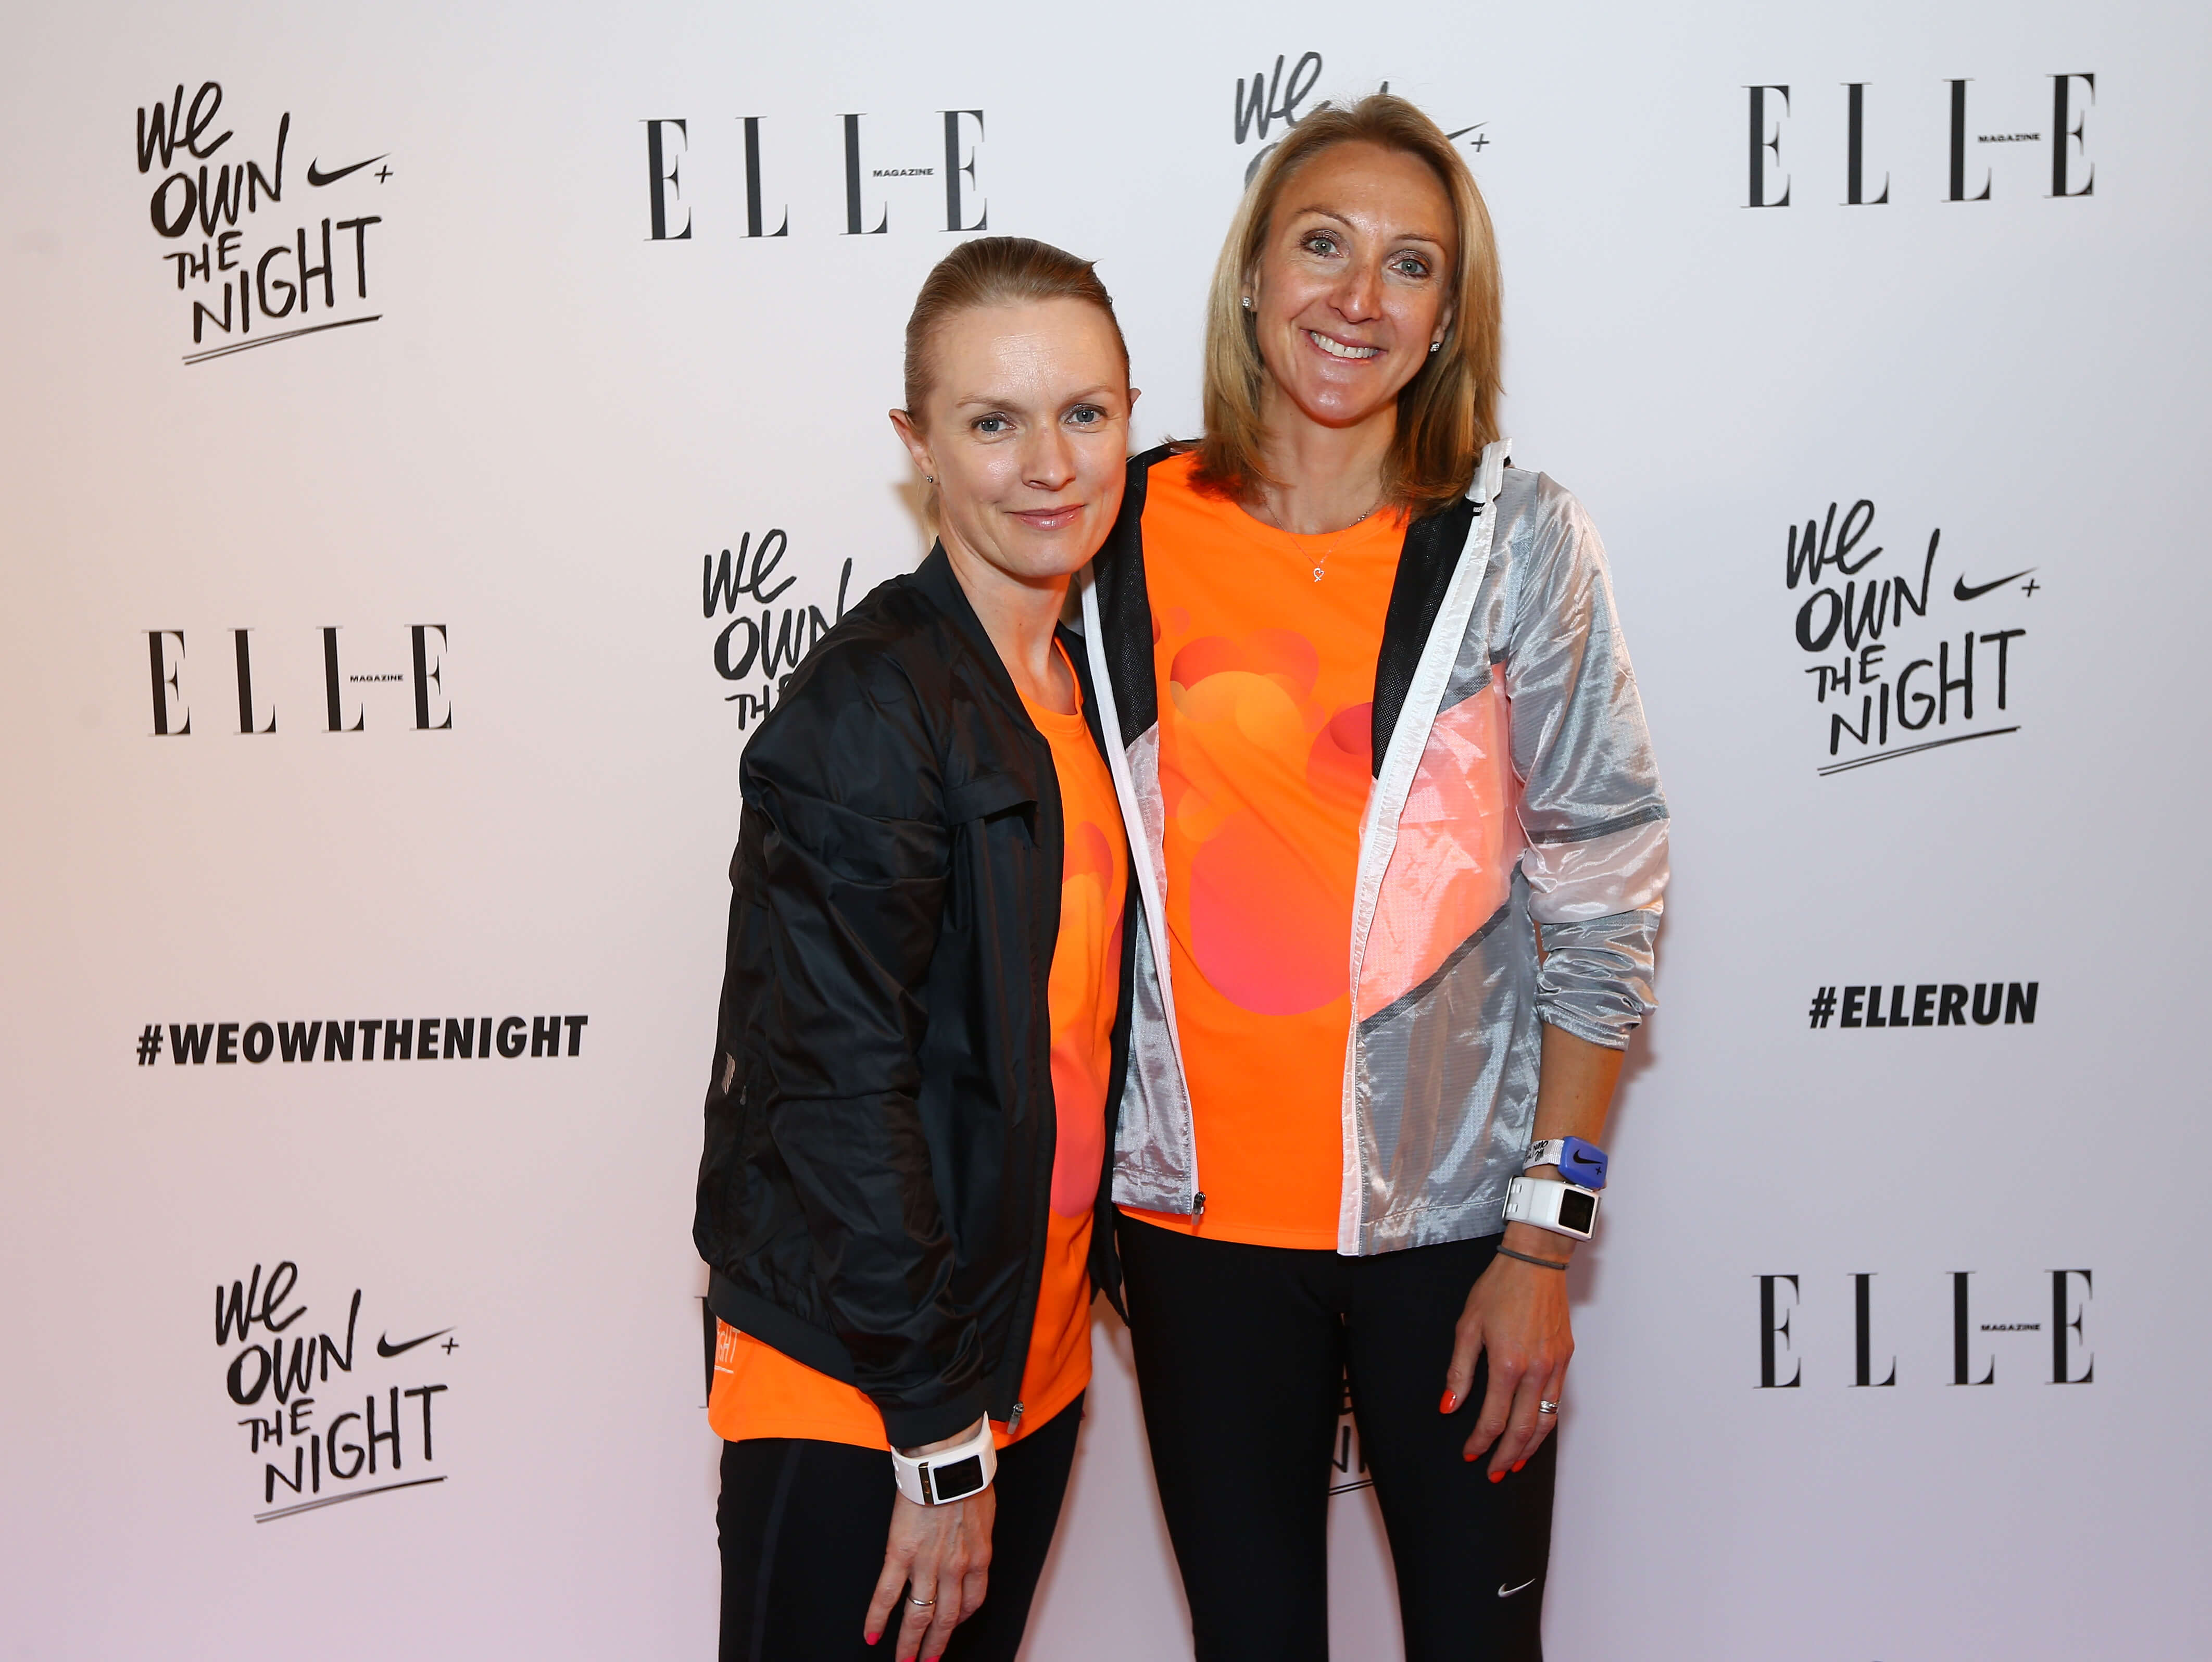 Torvits-Trench-Nike-We-own-the-night-Run-Event-concept-experience-graphic-design-Elle-Party-Paula-Radcliffe